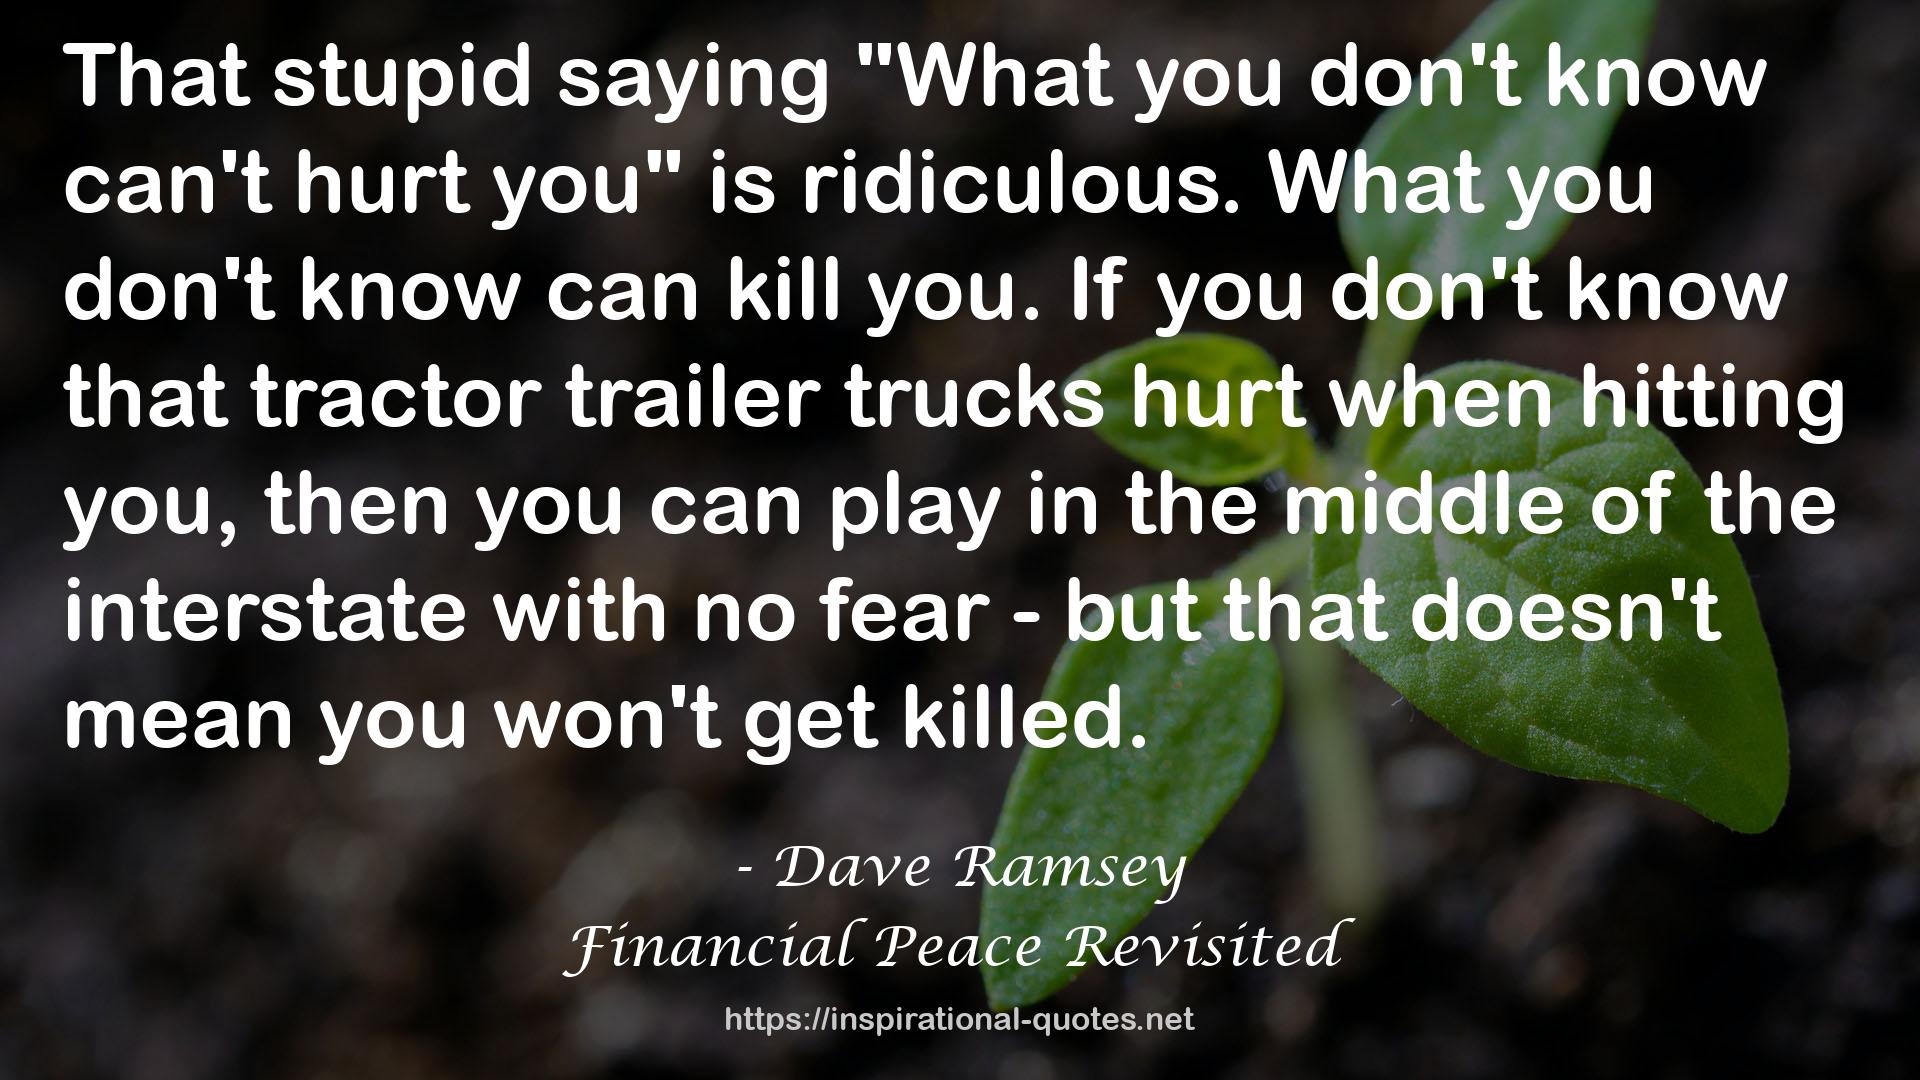 Financial Peace Revisited QUOTES